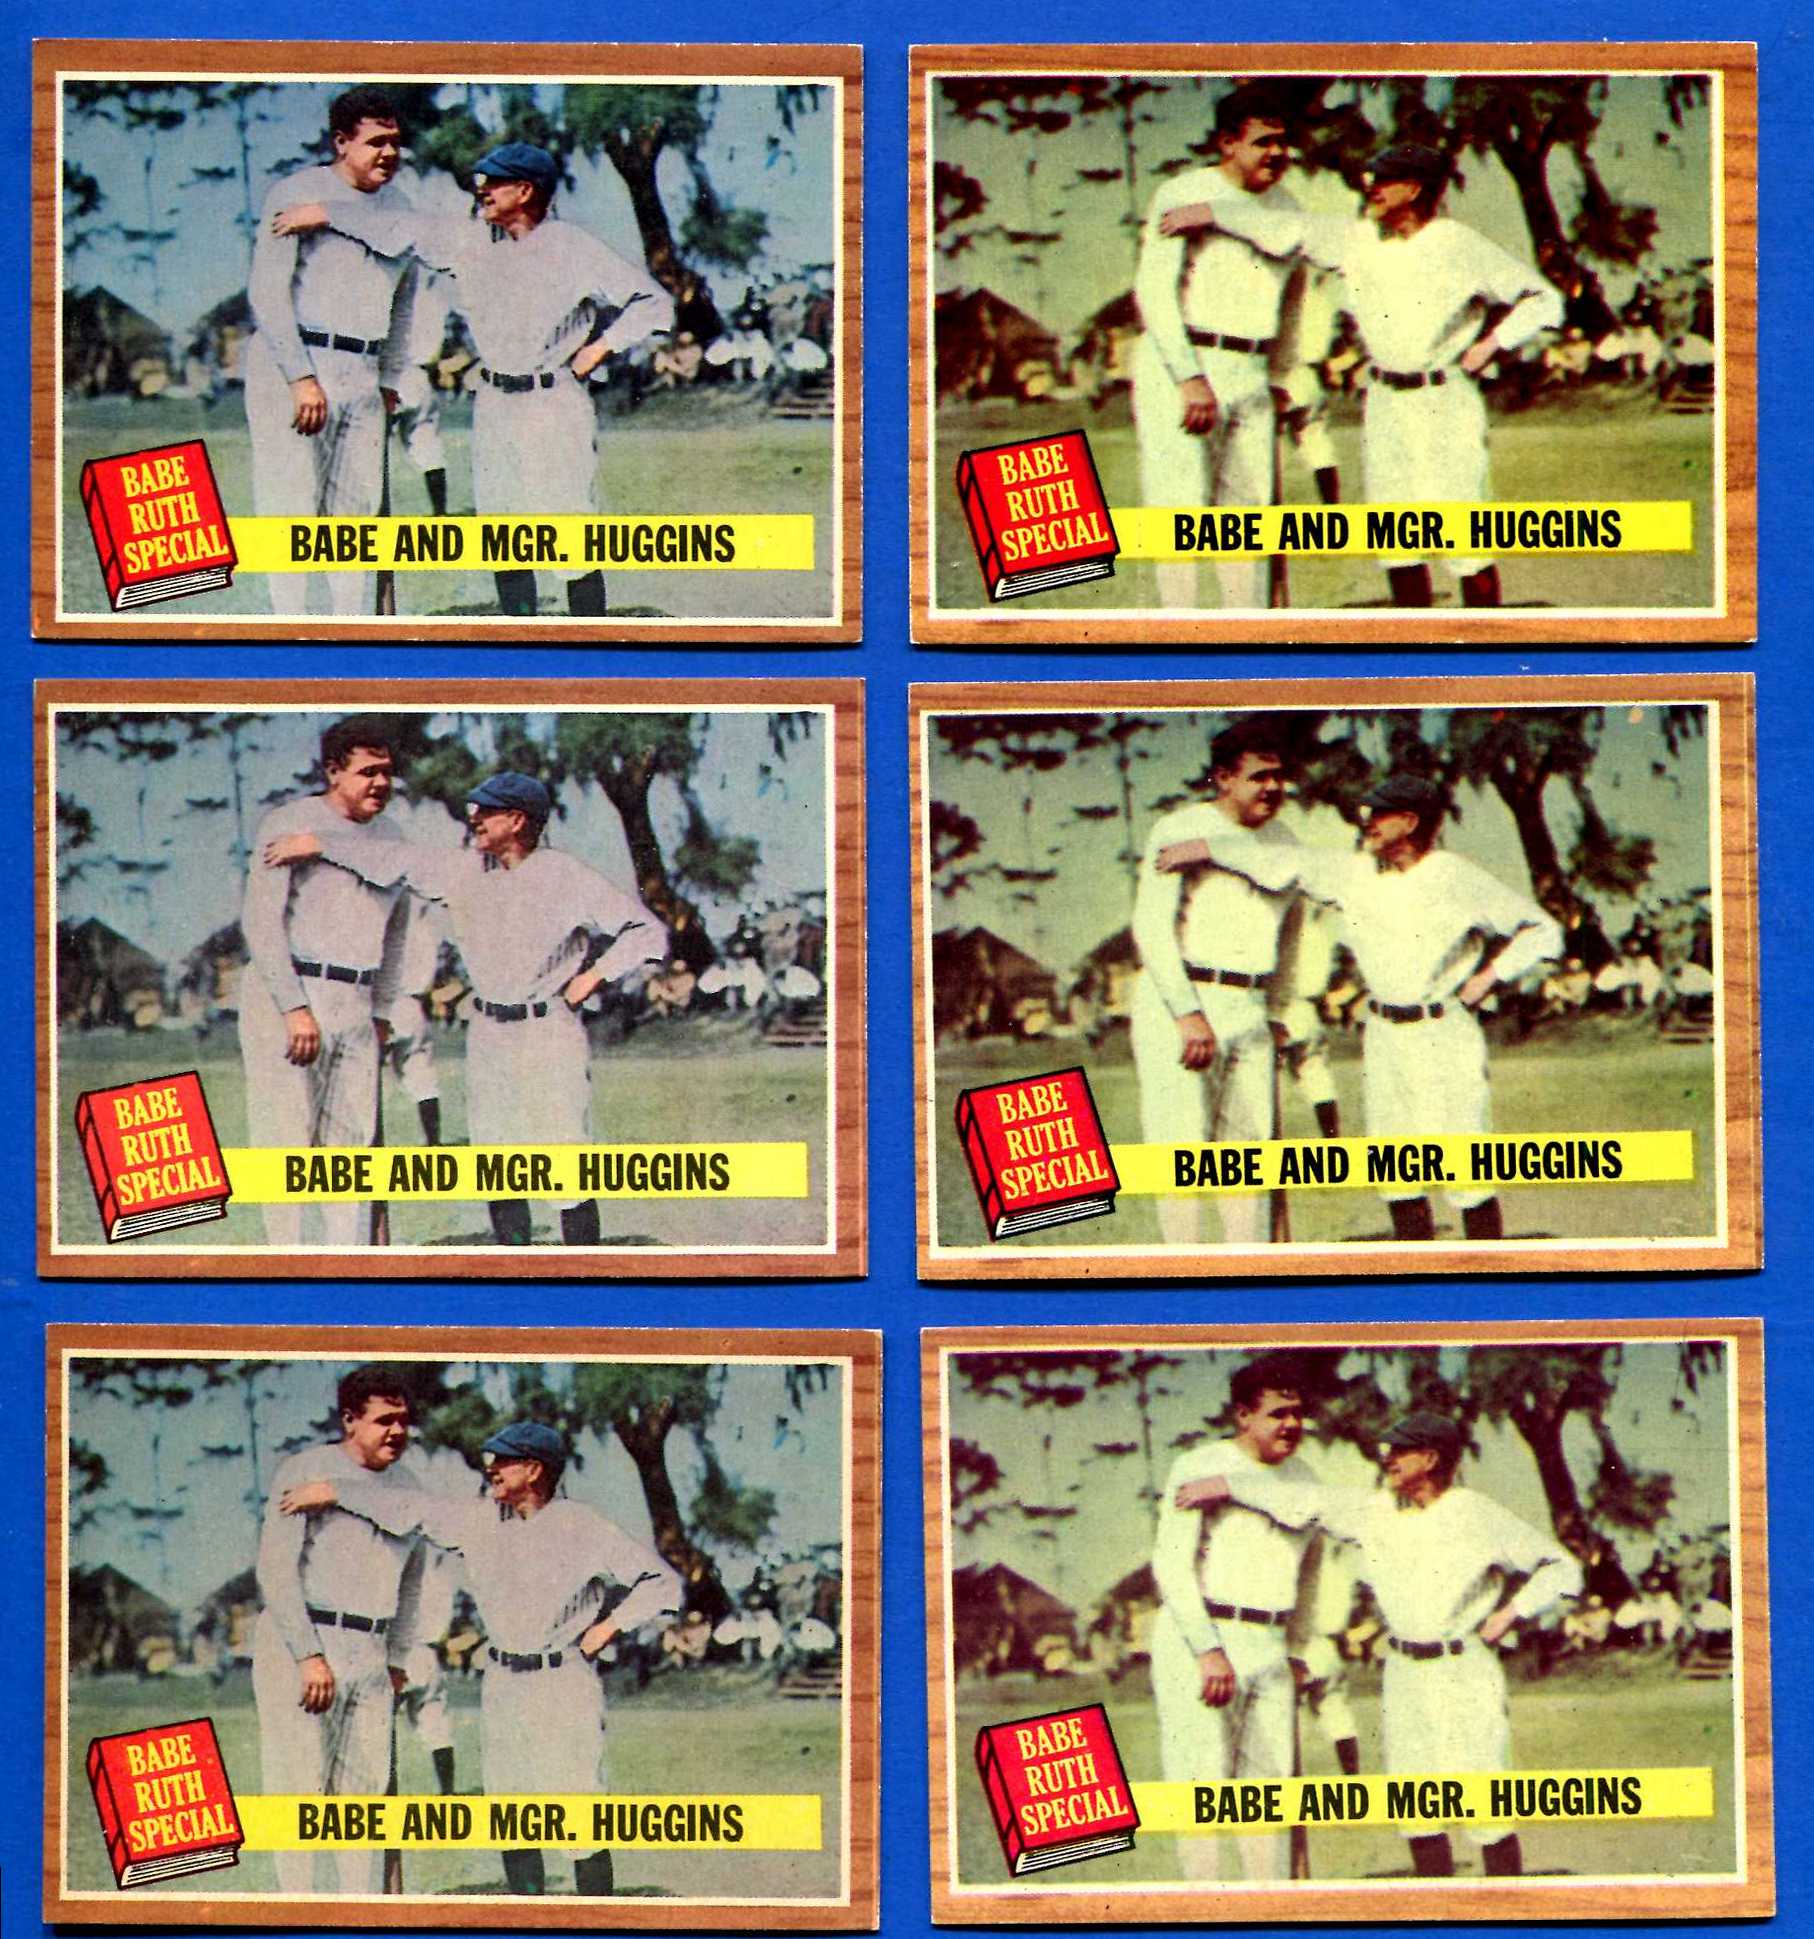 1962 Topps #137 Babe Ruth Special #3 [VAR:Green Tint] (Yankees) Baseball cards value